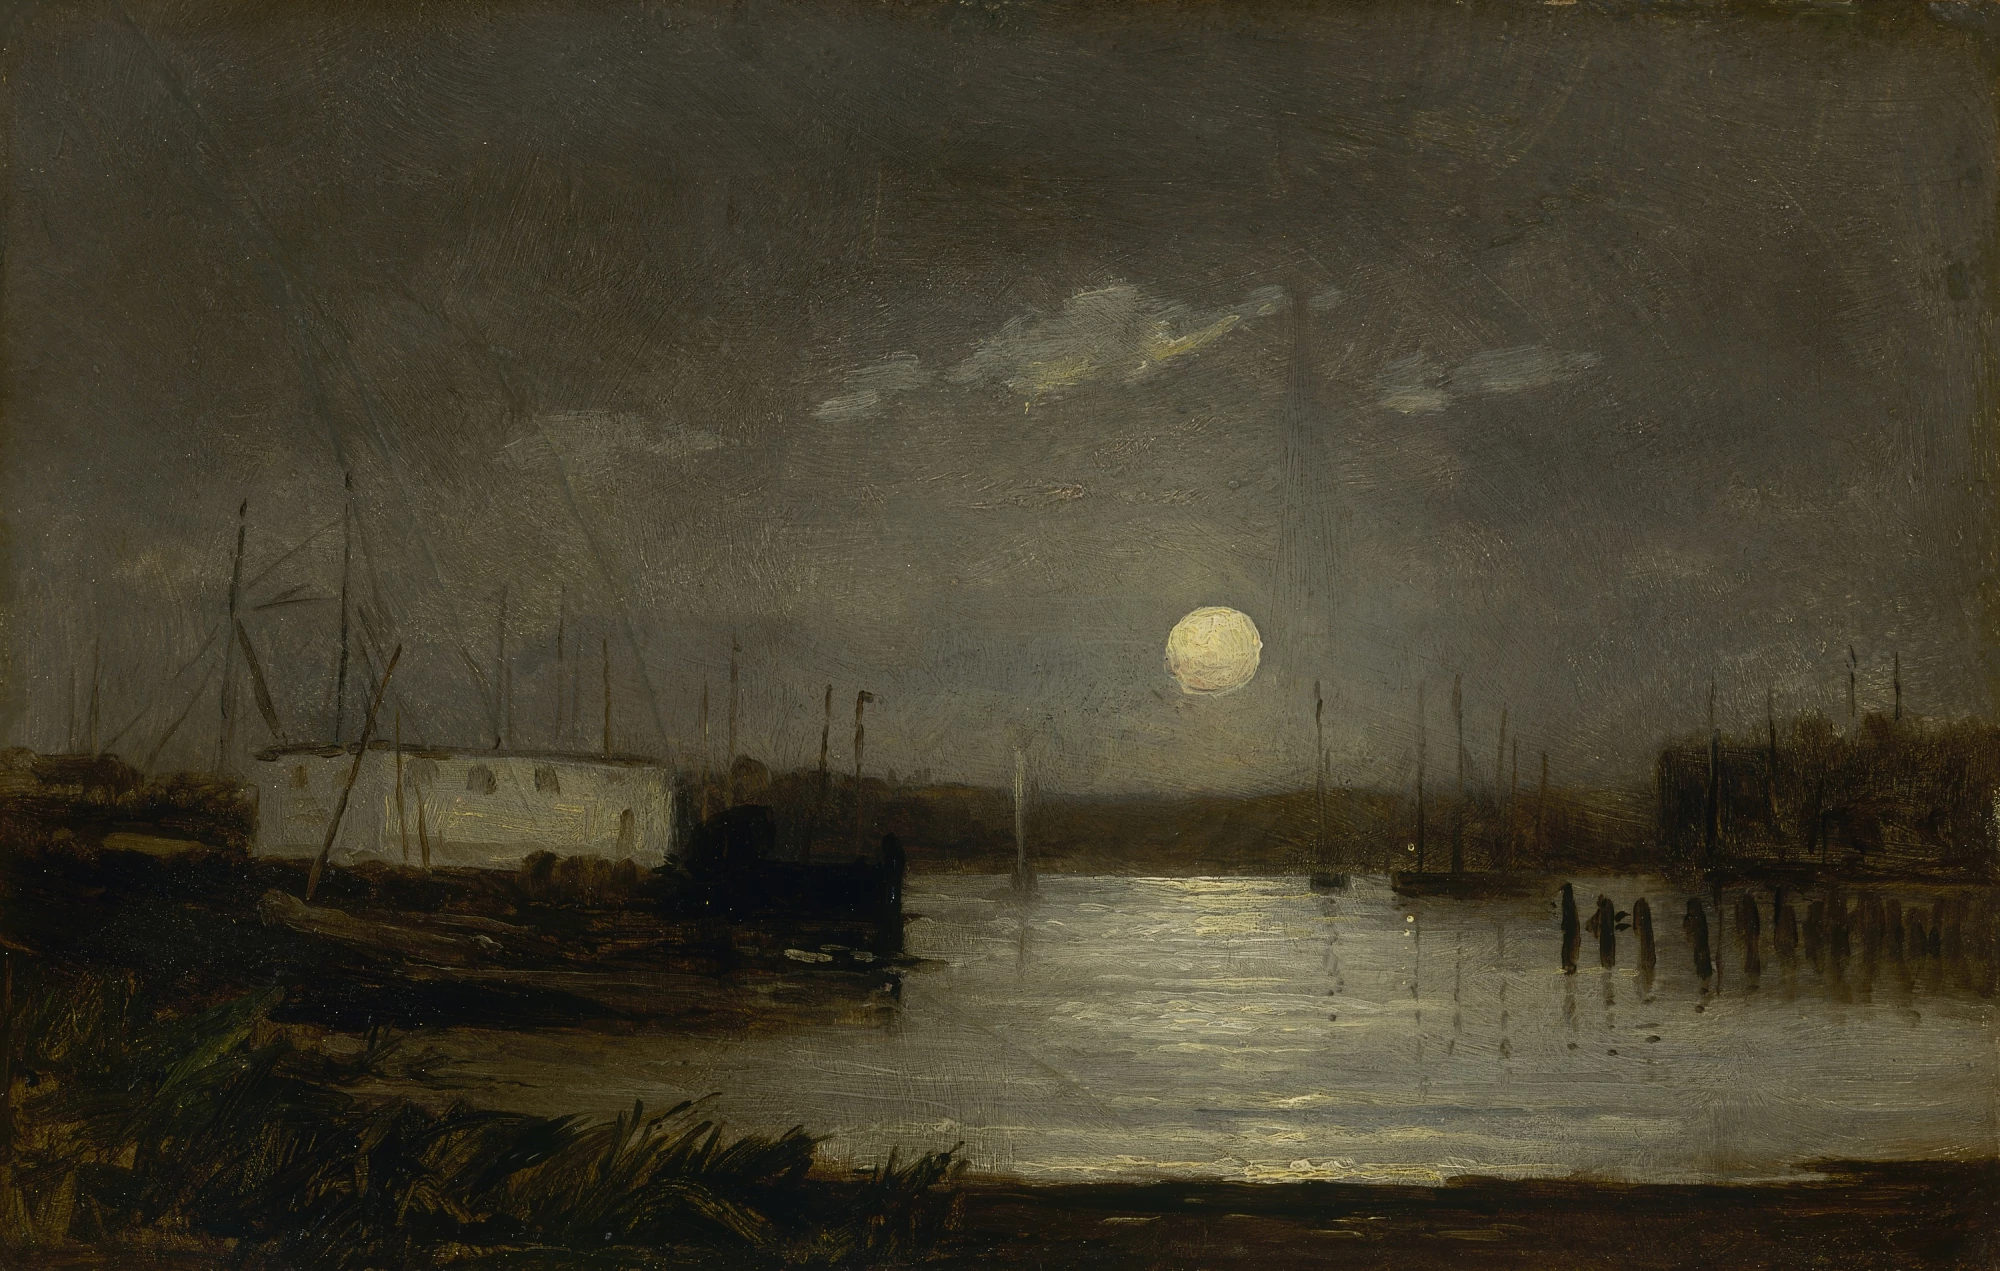 Untitled, Moon Over a Harbor, Edward Mitchell Bannister